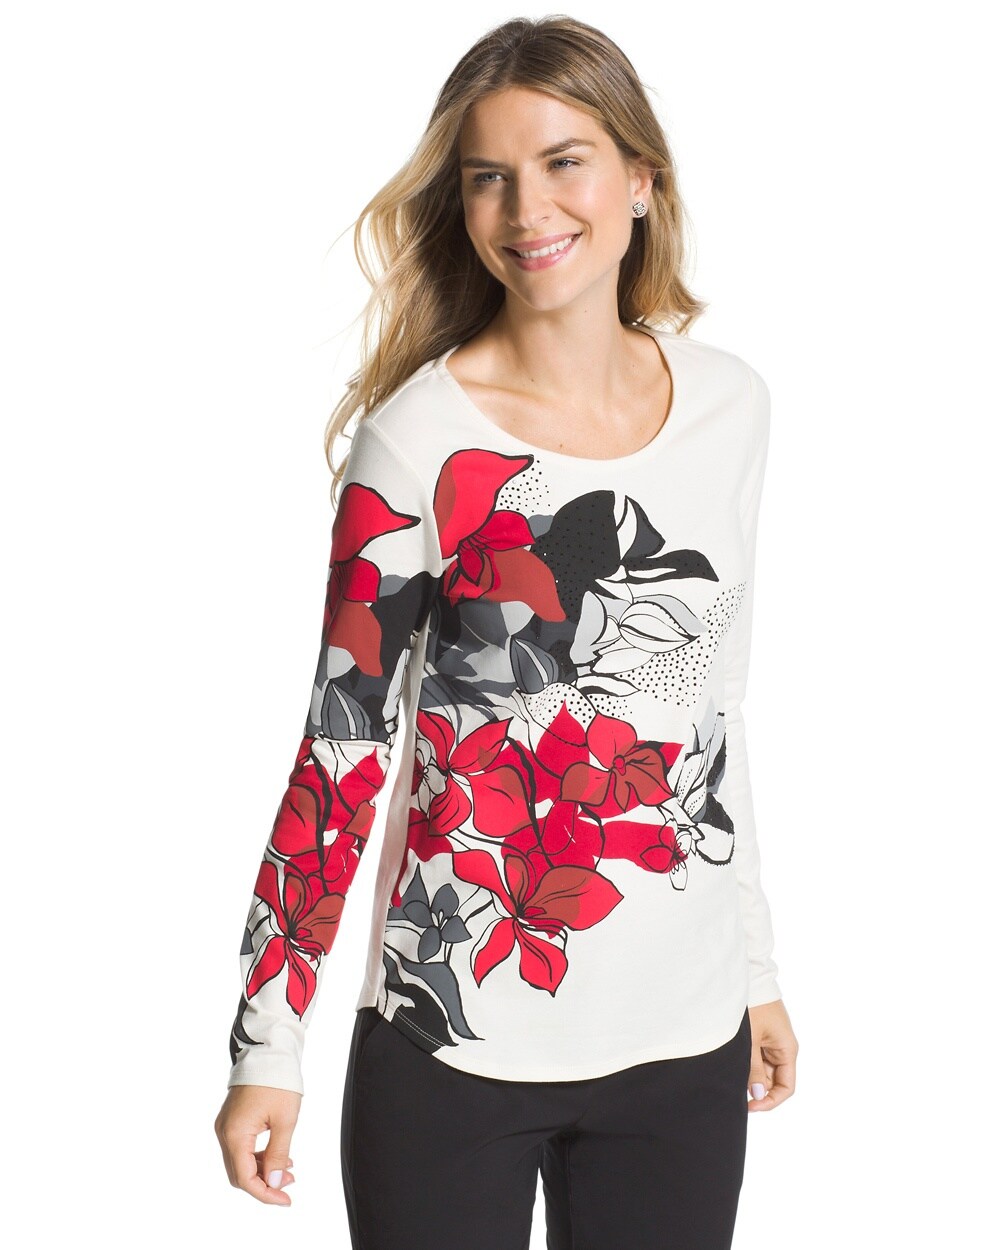 Zenergy Placed Floral Top